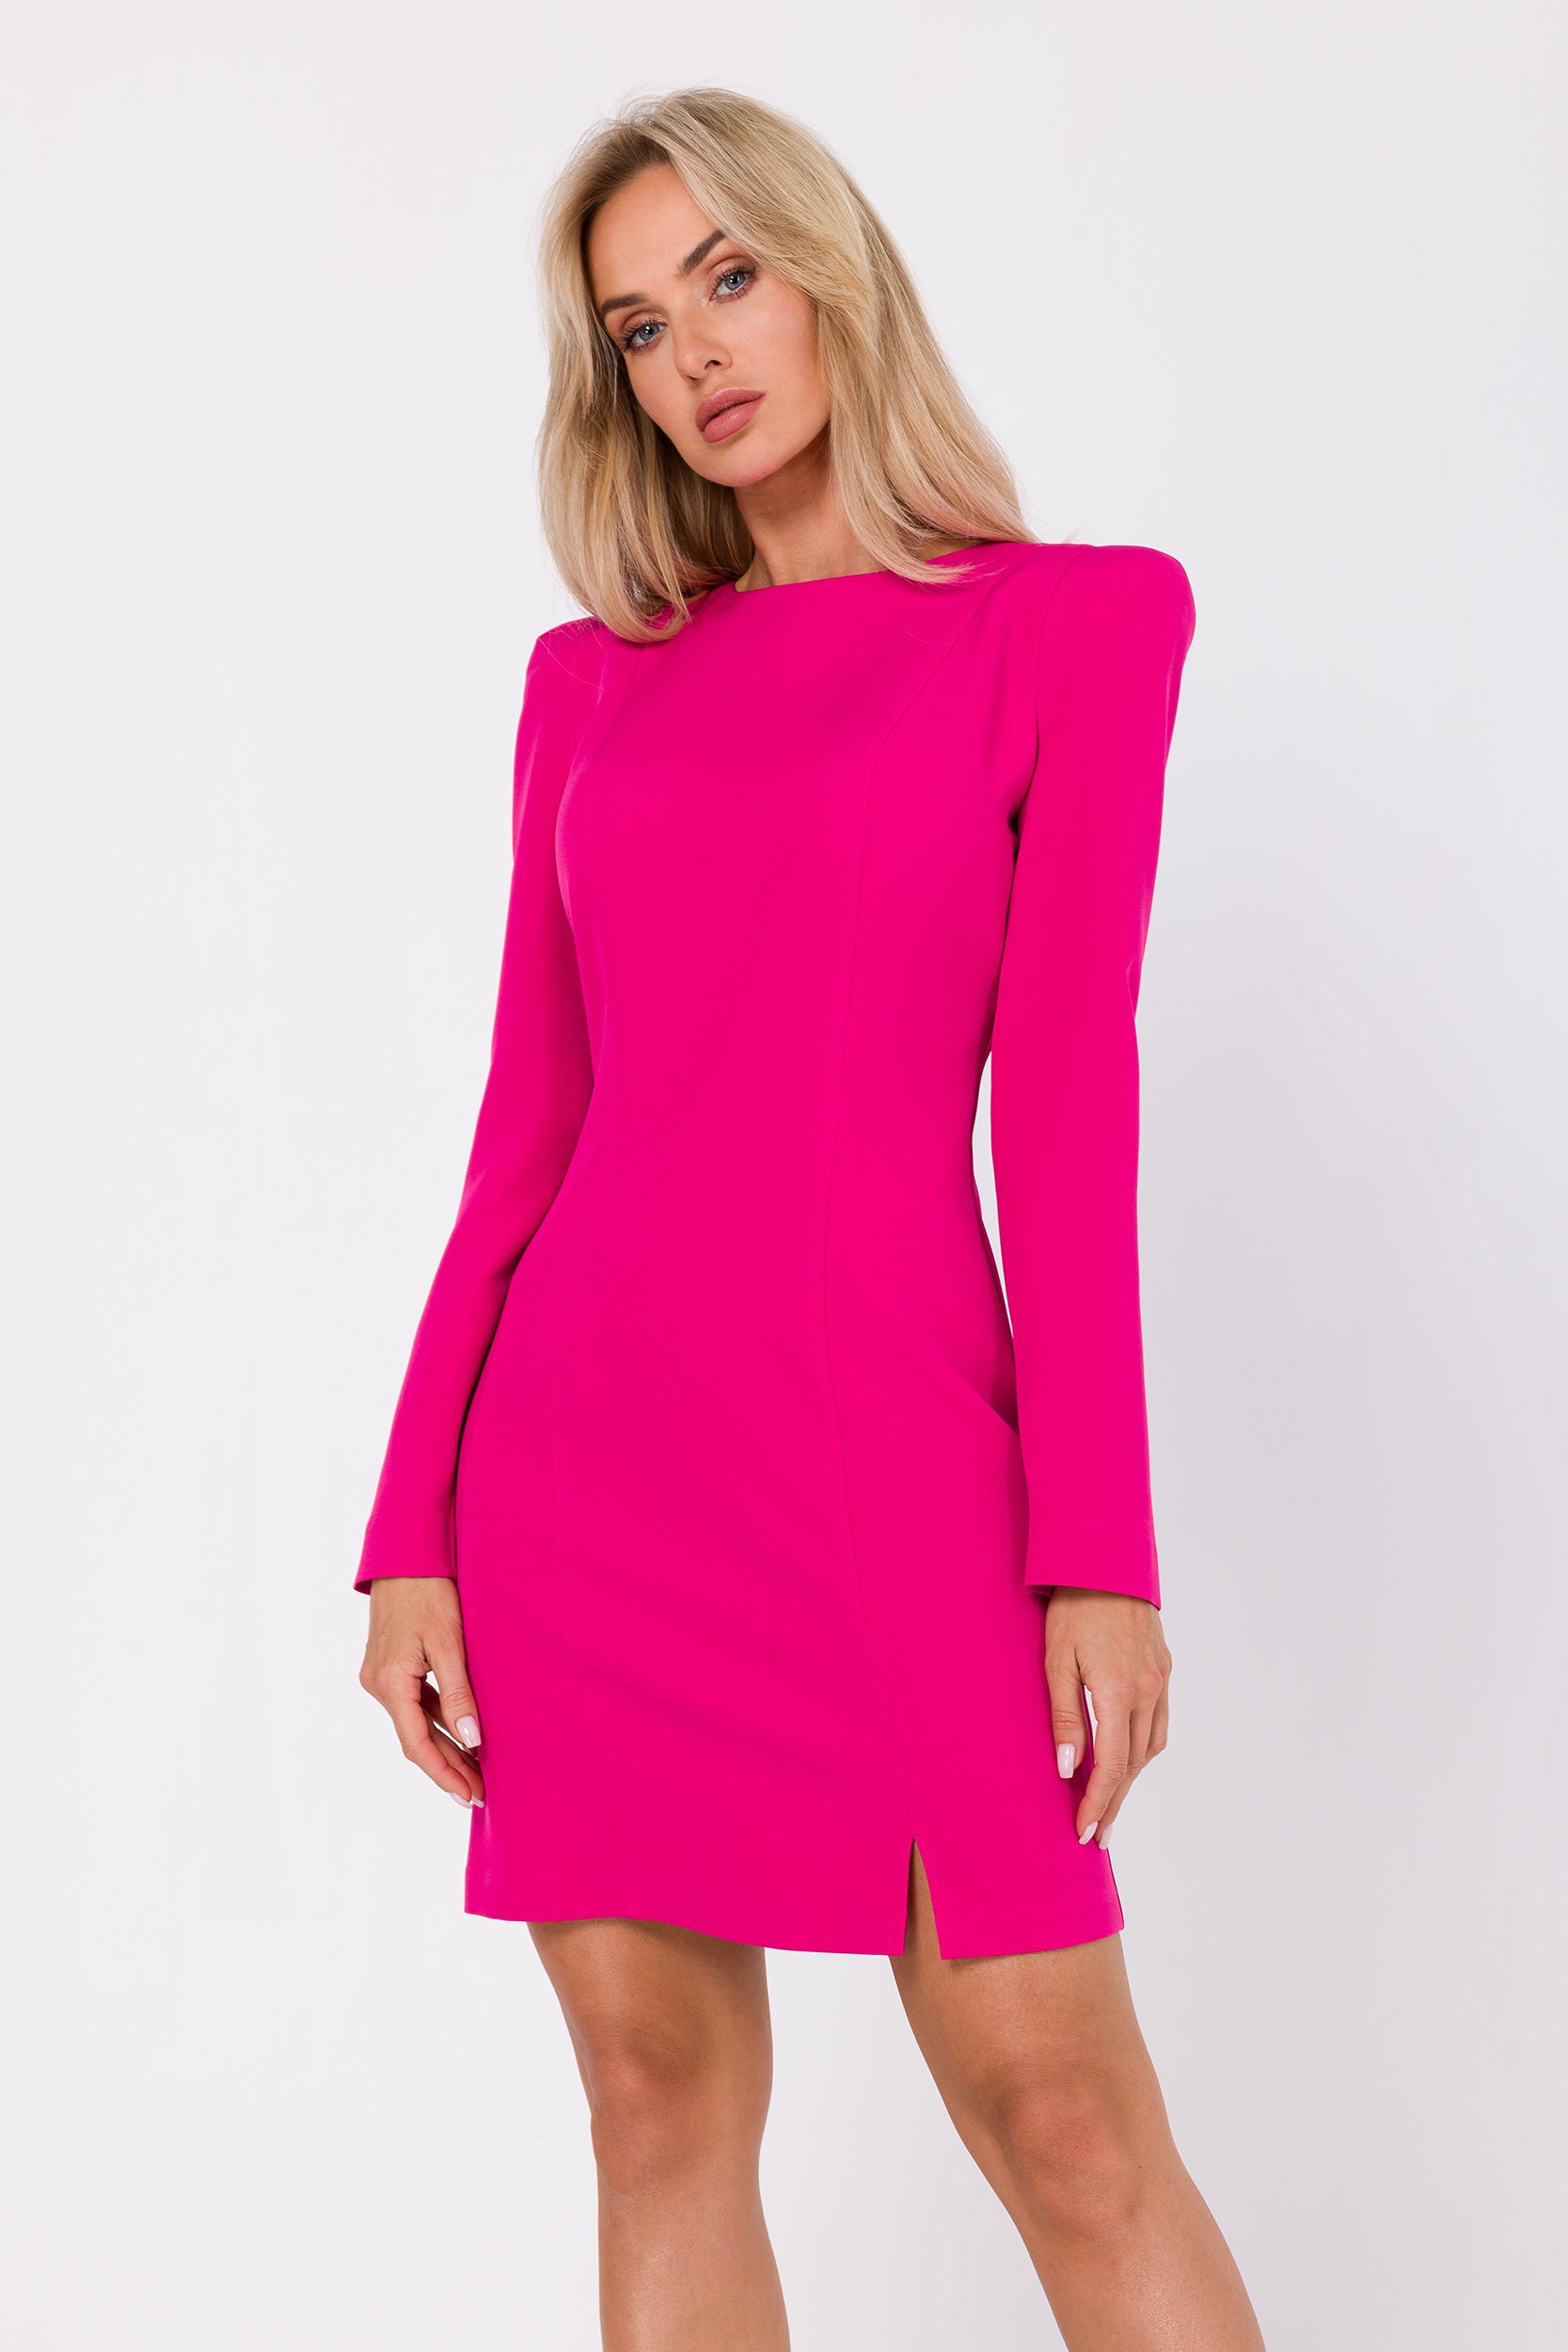 Upgrade your wardrobe with our long sleeve pink mini dress. Crafted from premium woven fabric, this sheath dress features front stitching, padded shoulders, and a hidden back zip. Elevate your style effortlessly. Shop now!